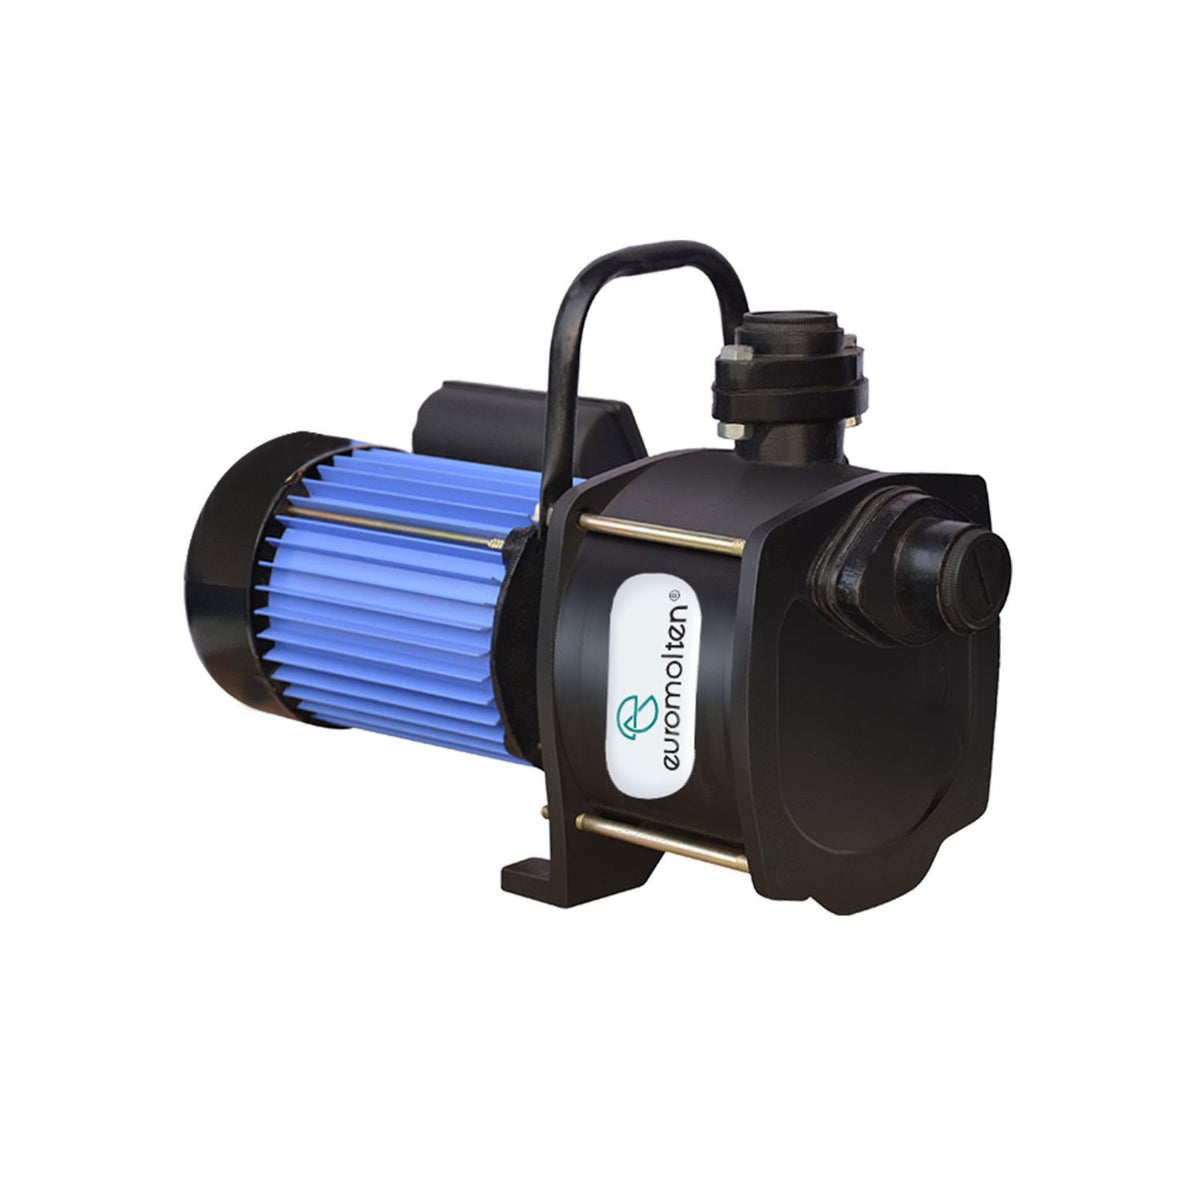 EUROMOLTEN 0.5Hp Shallow well Jet pump with high Pressure & discharge